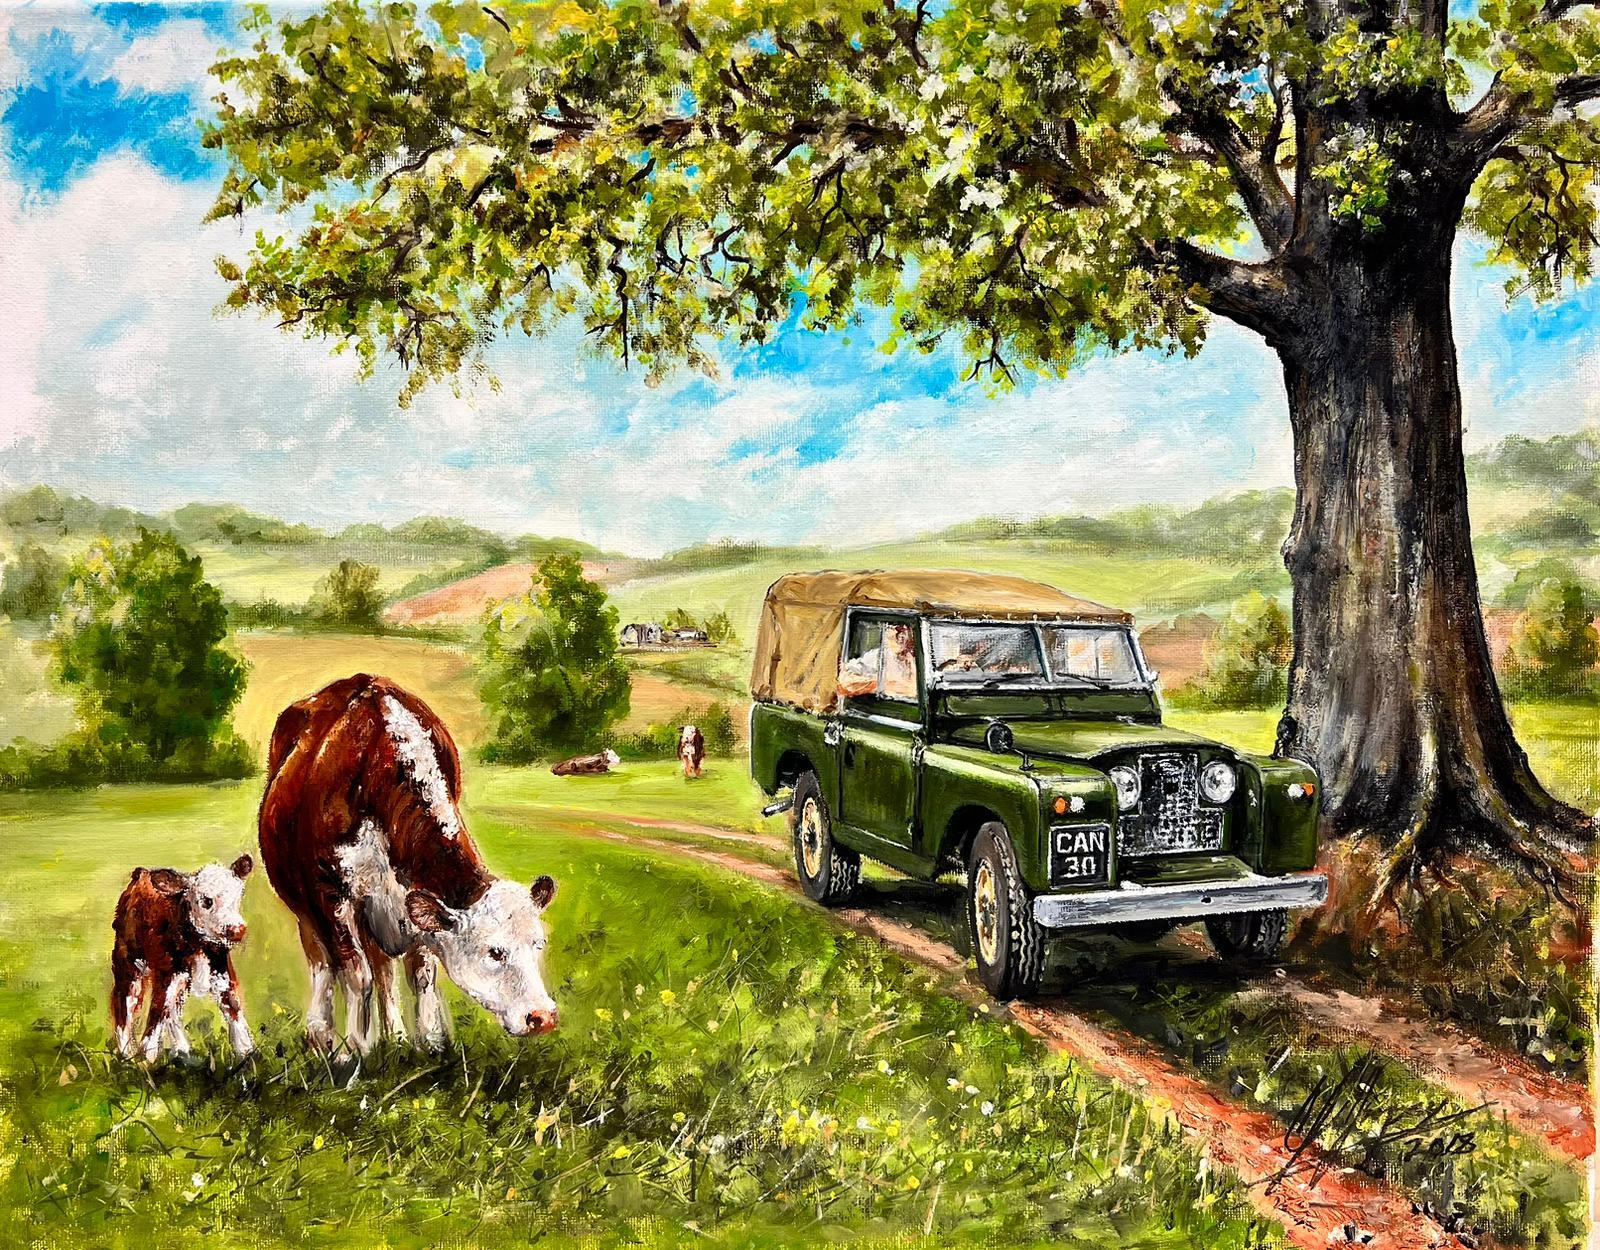 Colin Impey Landscape Painting - Traditional Rural English Oil Painting 1950's Land Rover Farm Landscape & Cows